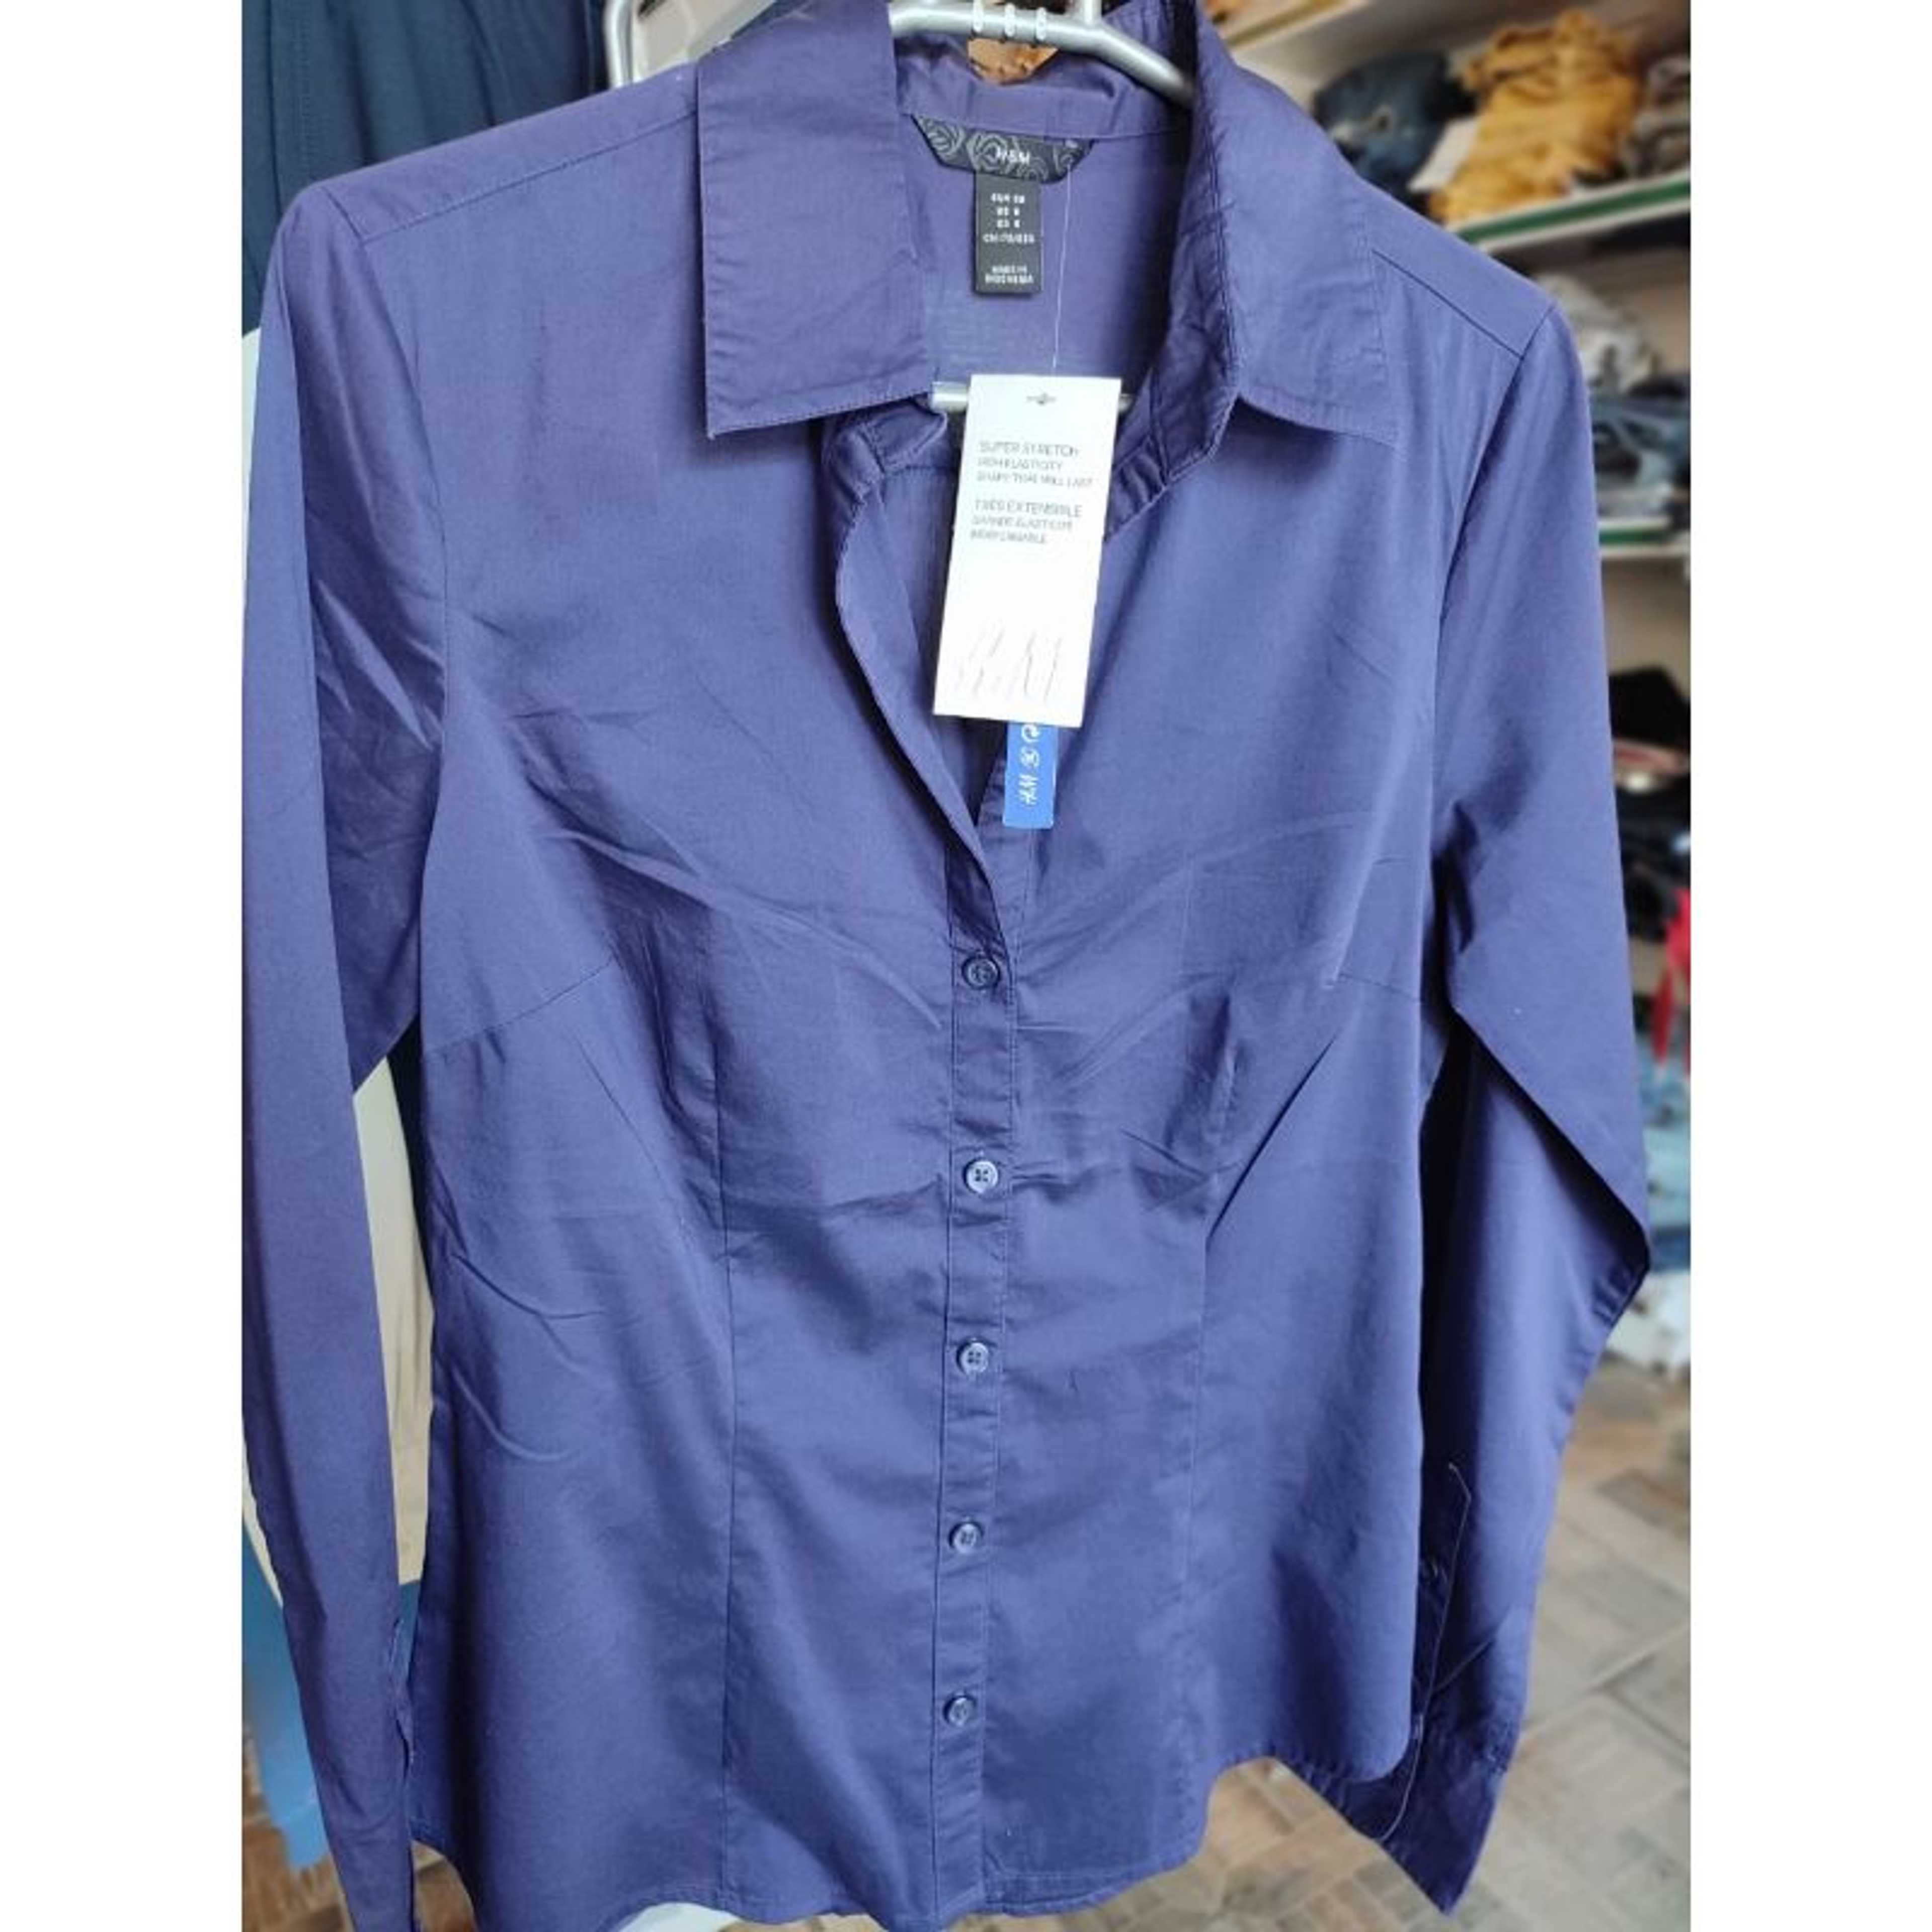 Girls formal shirts in Blue color